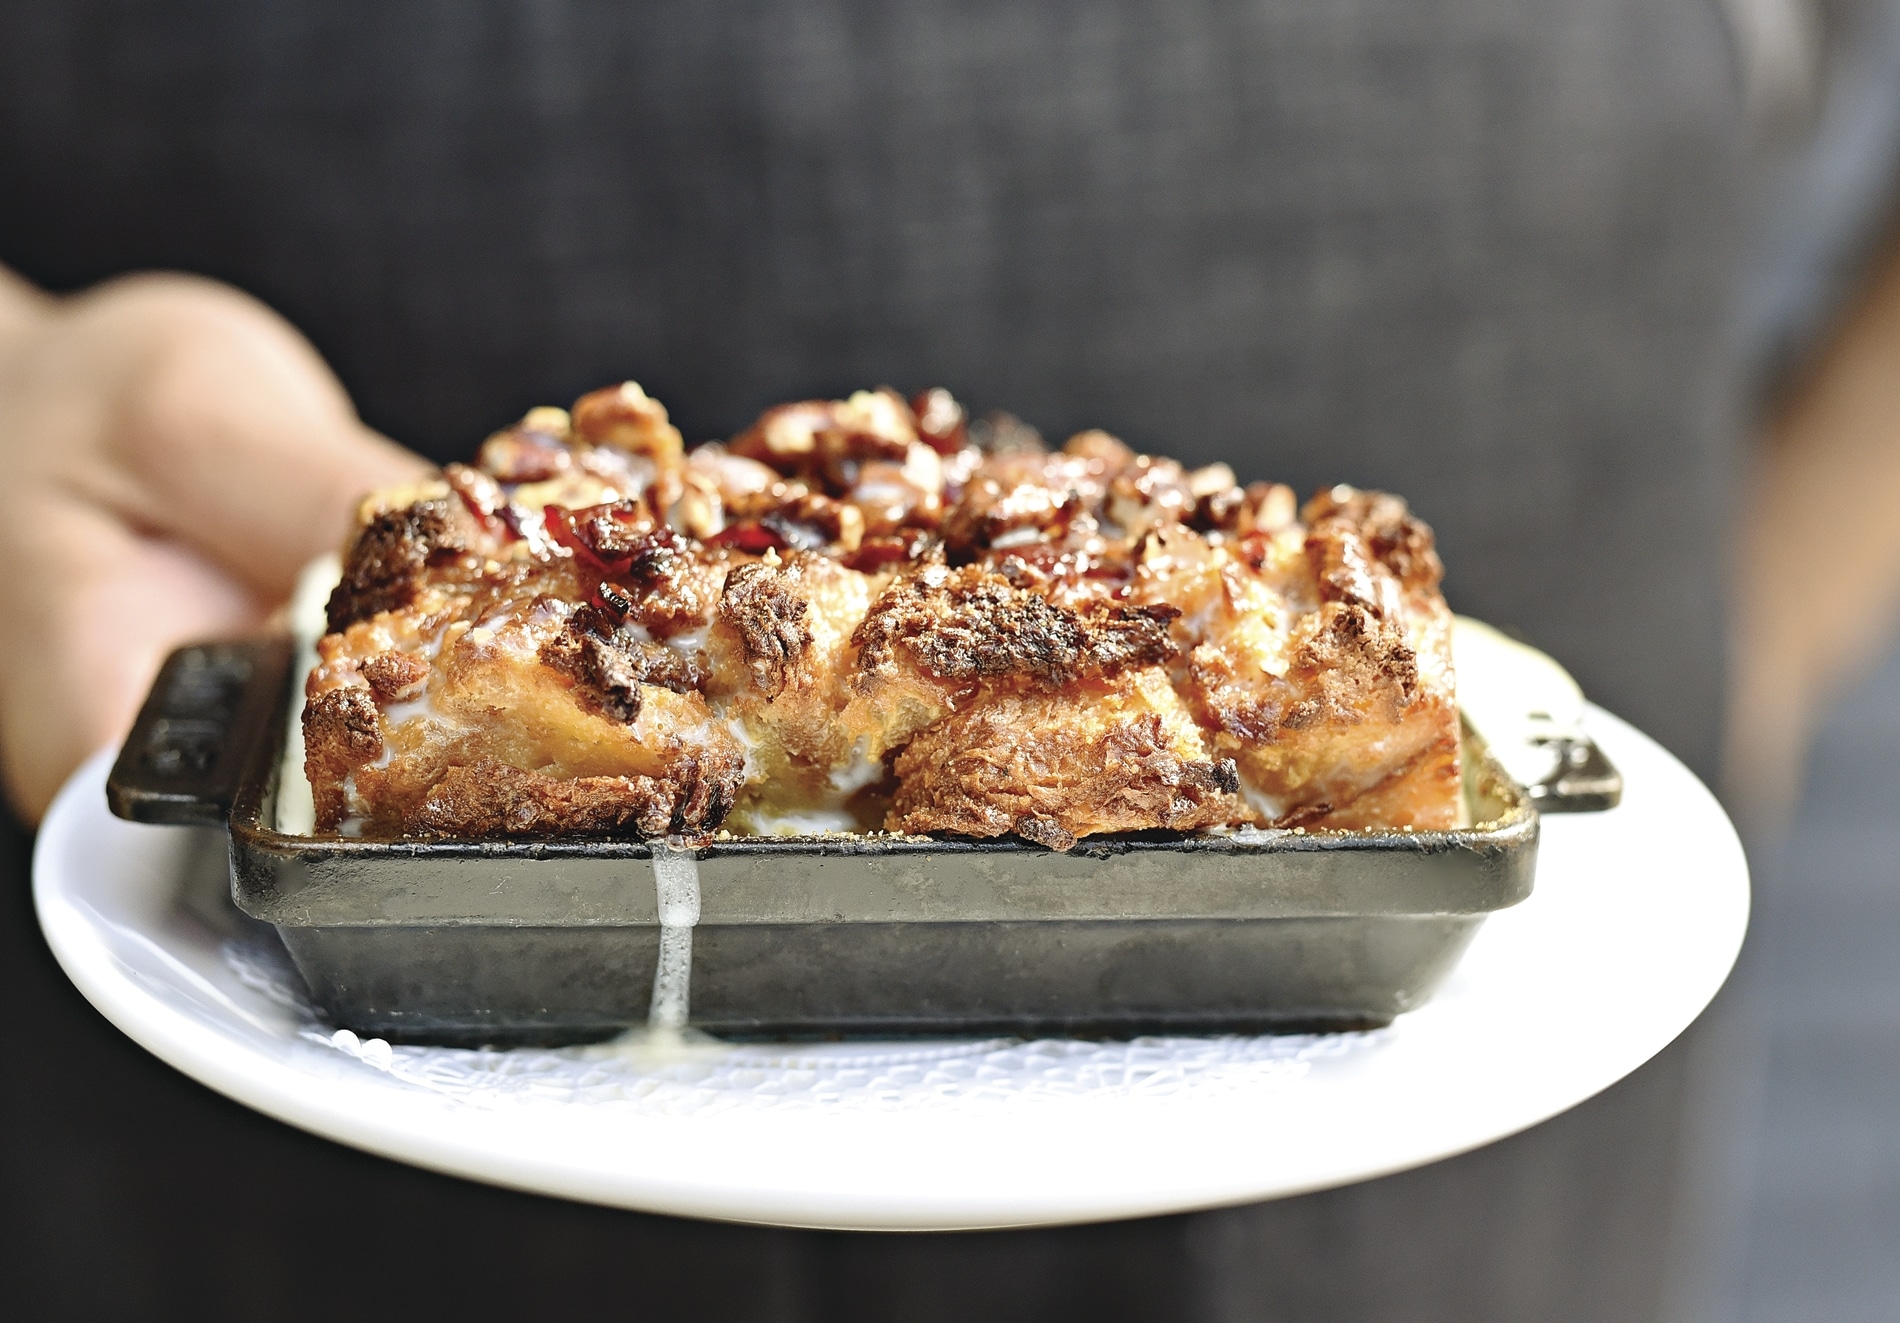 Bacon_Tres_Leches_Bread_Pudding_by_Kimberly_Park_(1).jpg